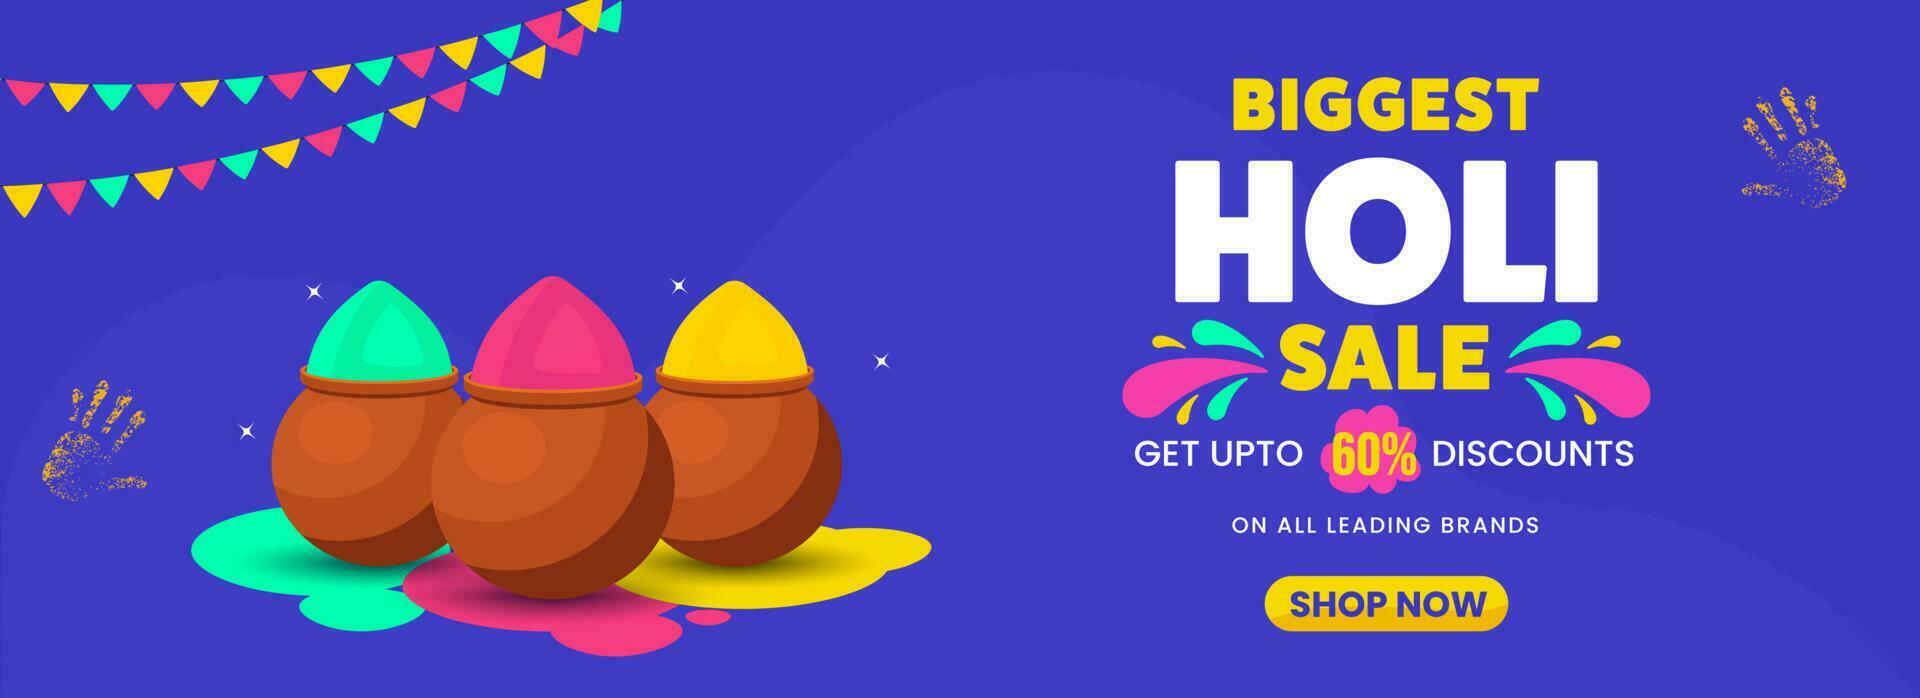 Biggest Holi Sale Banner Or Header Design With Clay Pots Full Of Dry Color. vector